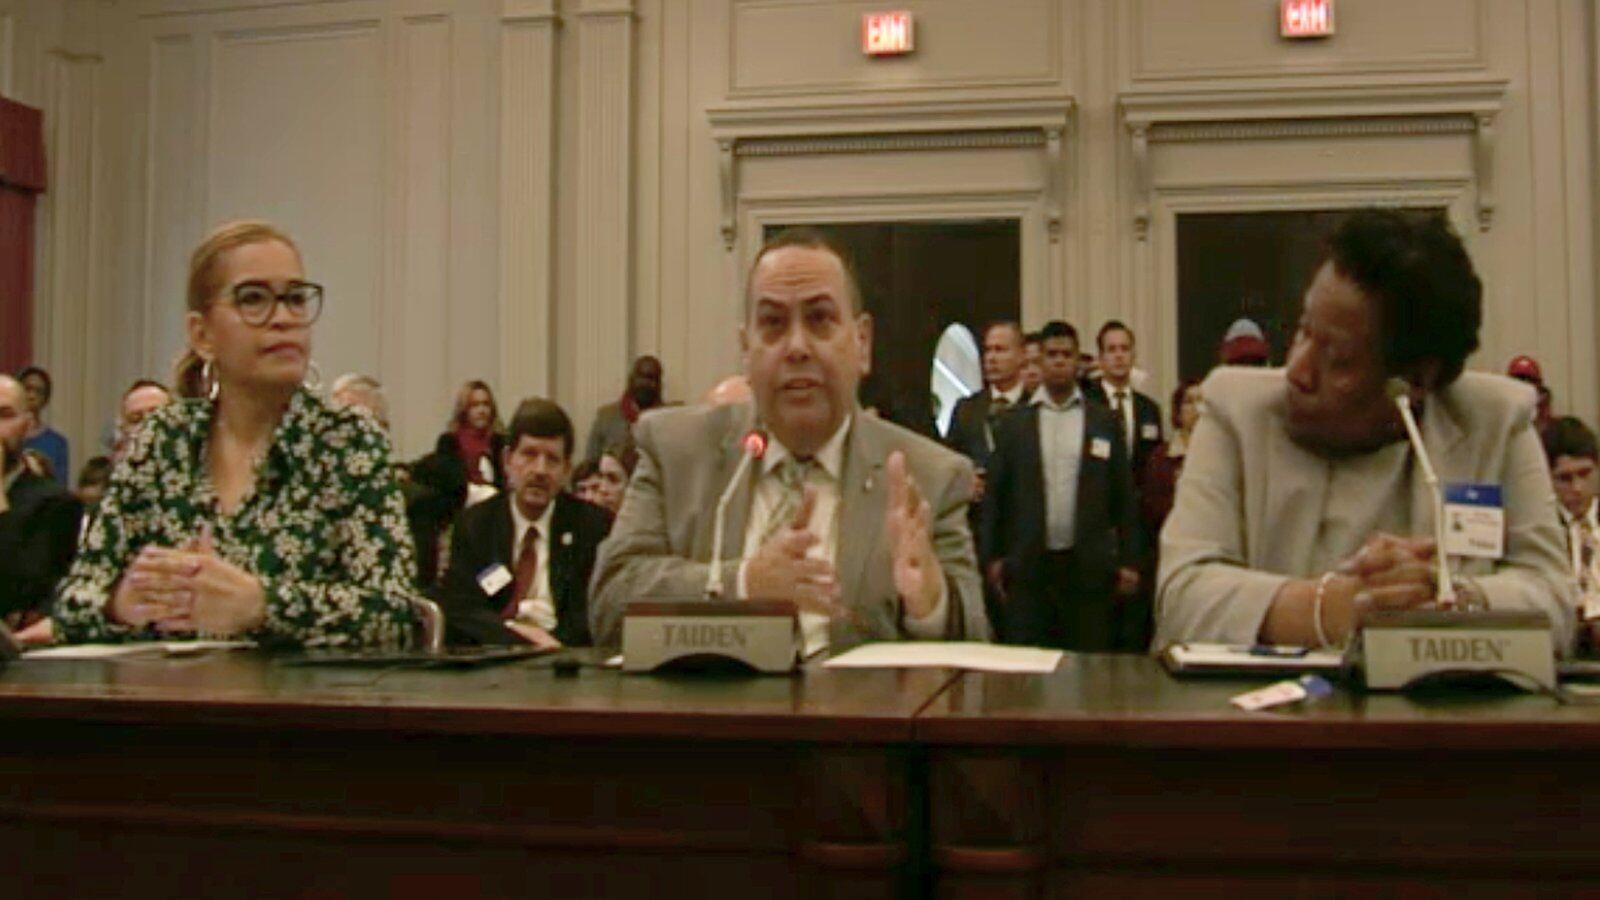 Newark Superintendent Roger León asked state lawmakers for more funding earlier this year. Now he's requesting emergency aid.